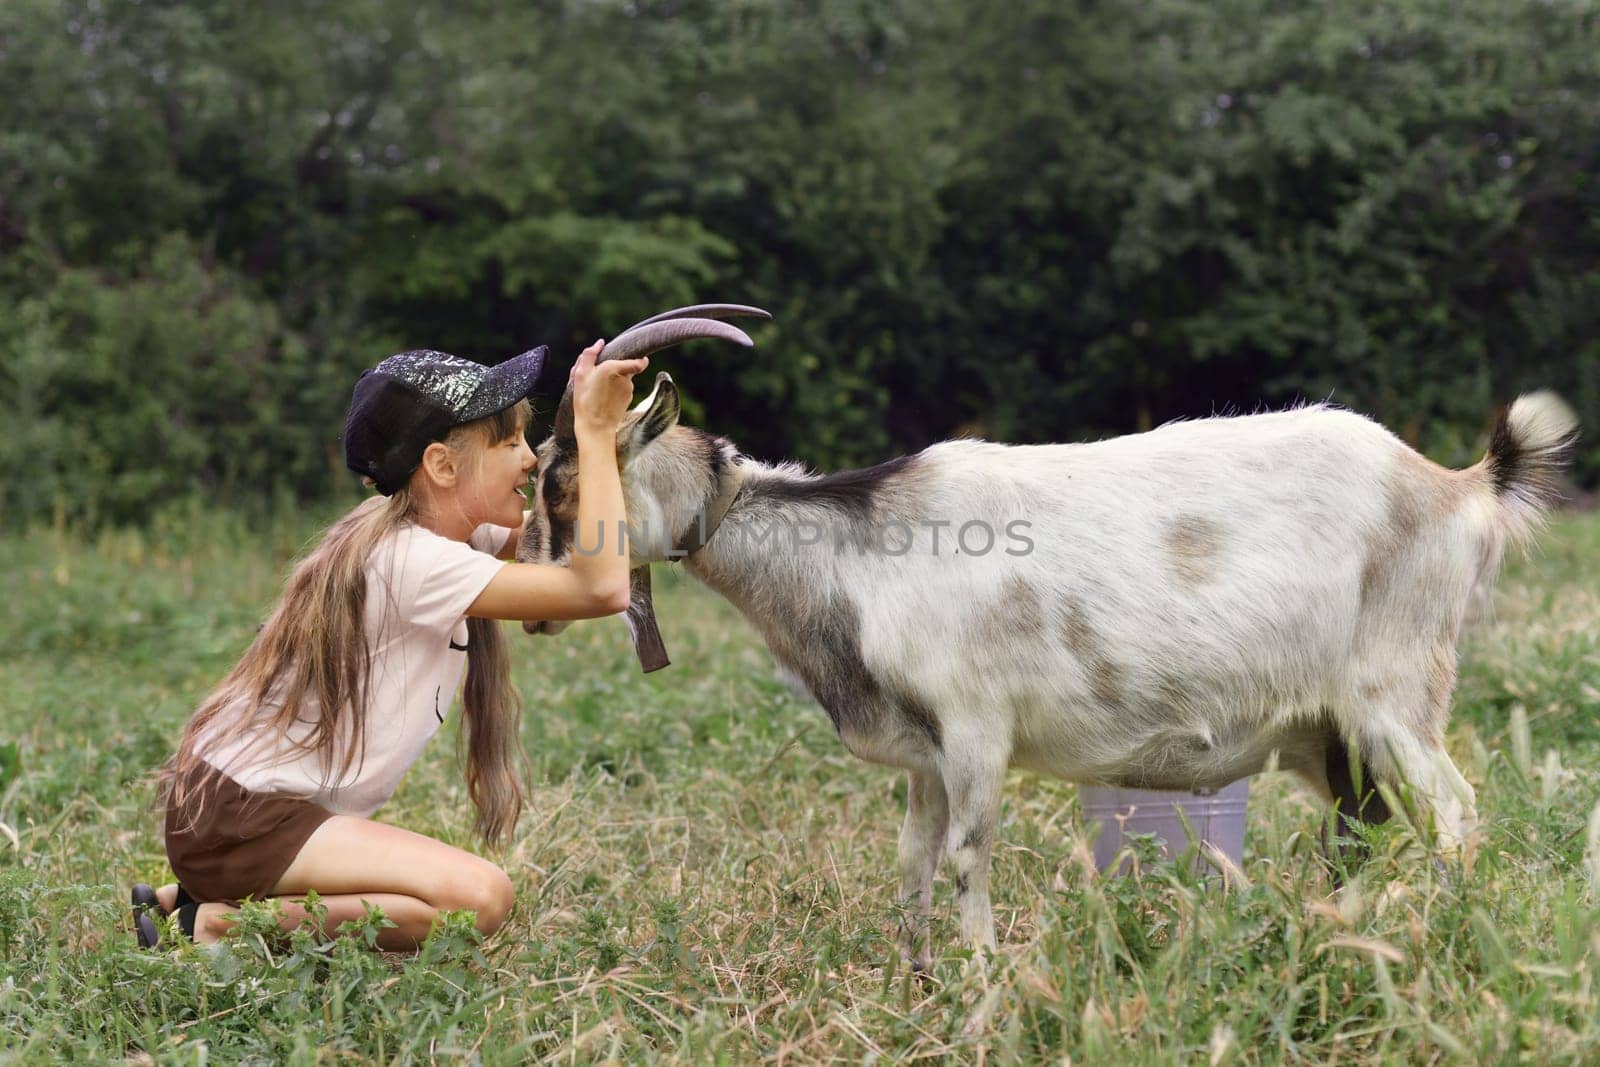 Girl hugging her goat as a friend in the village